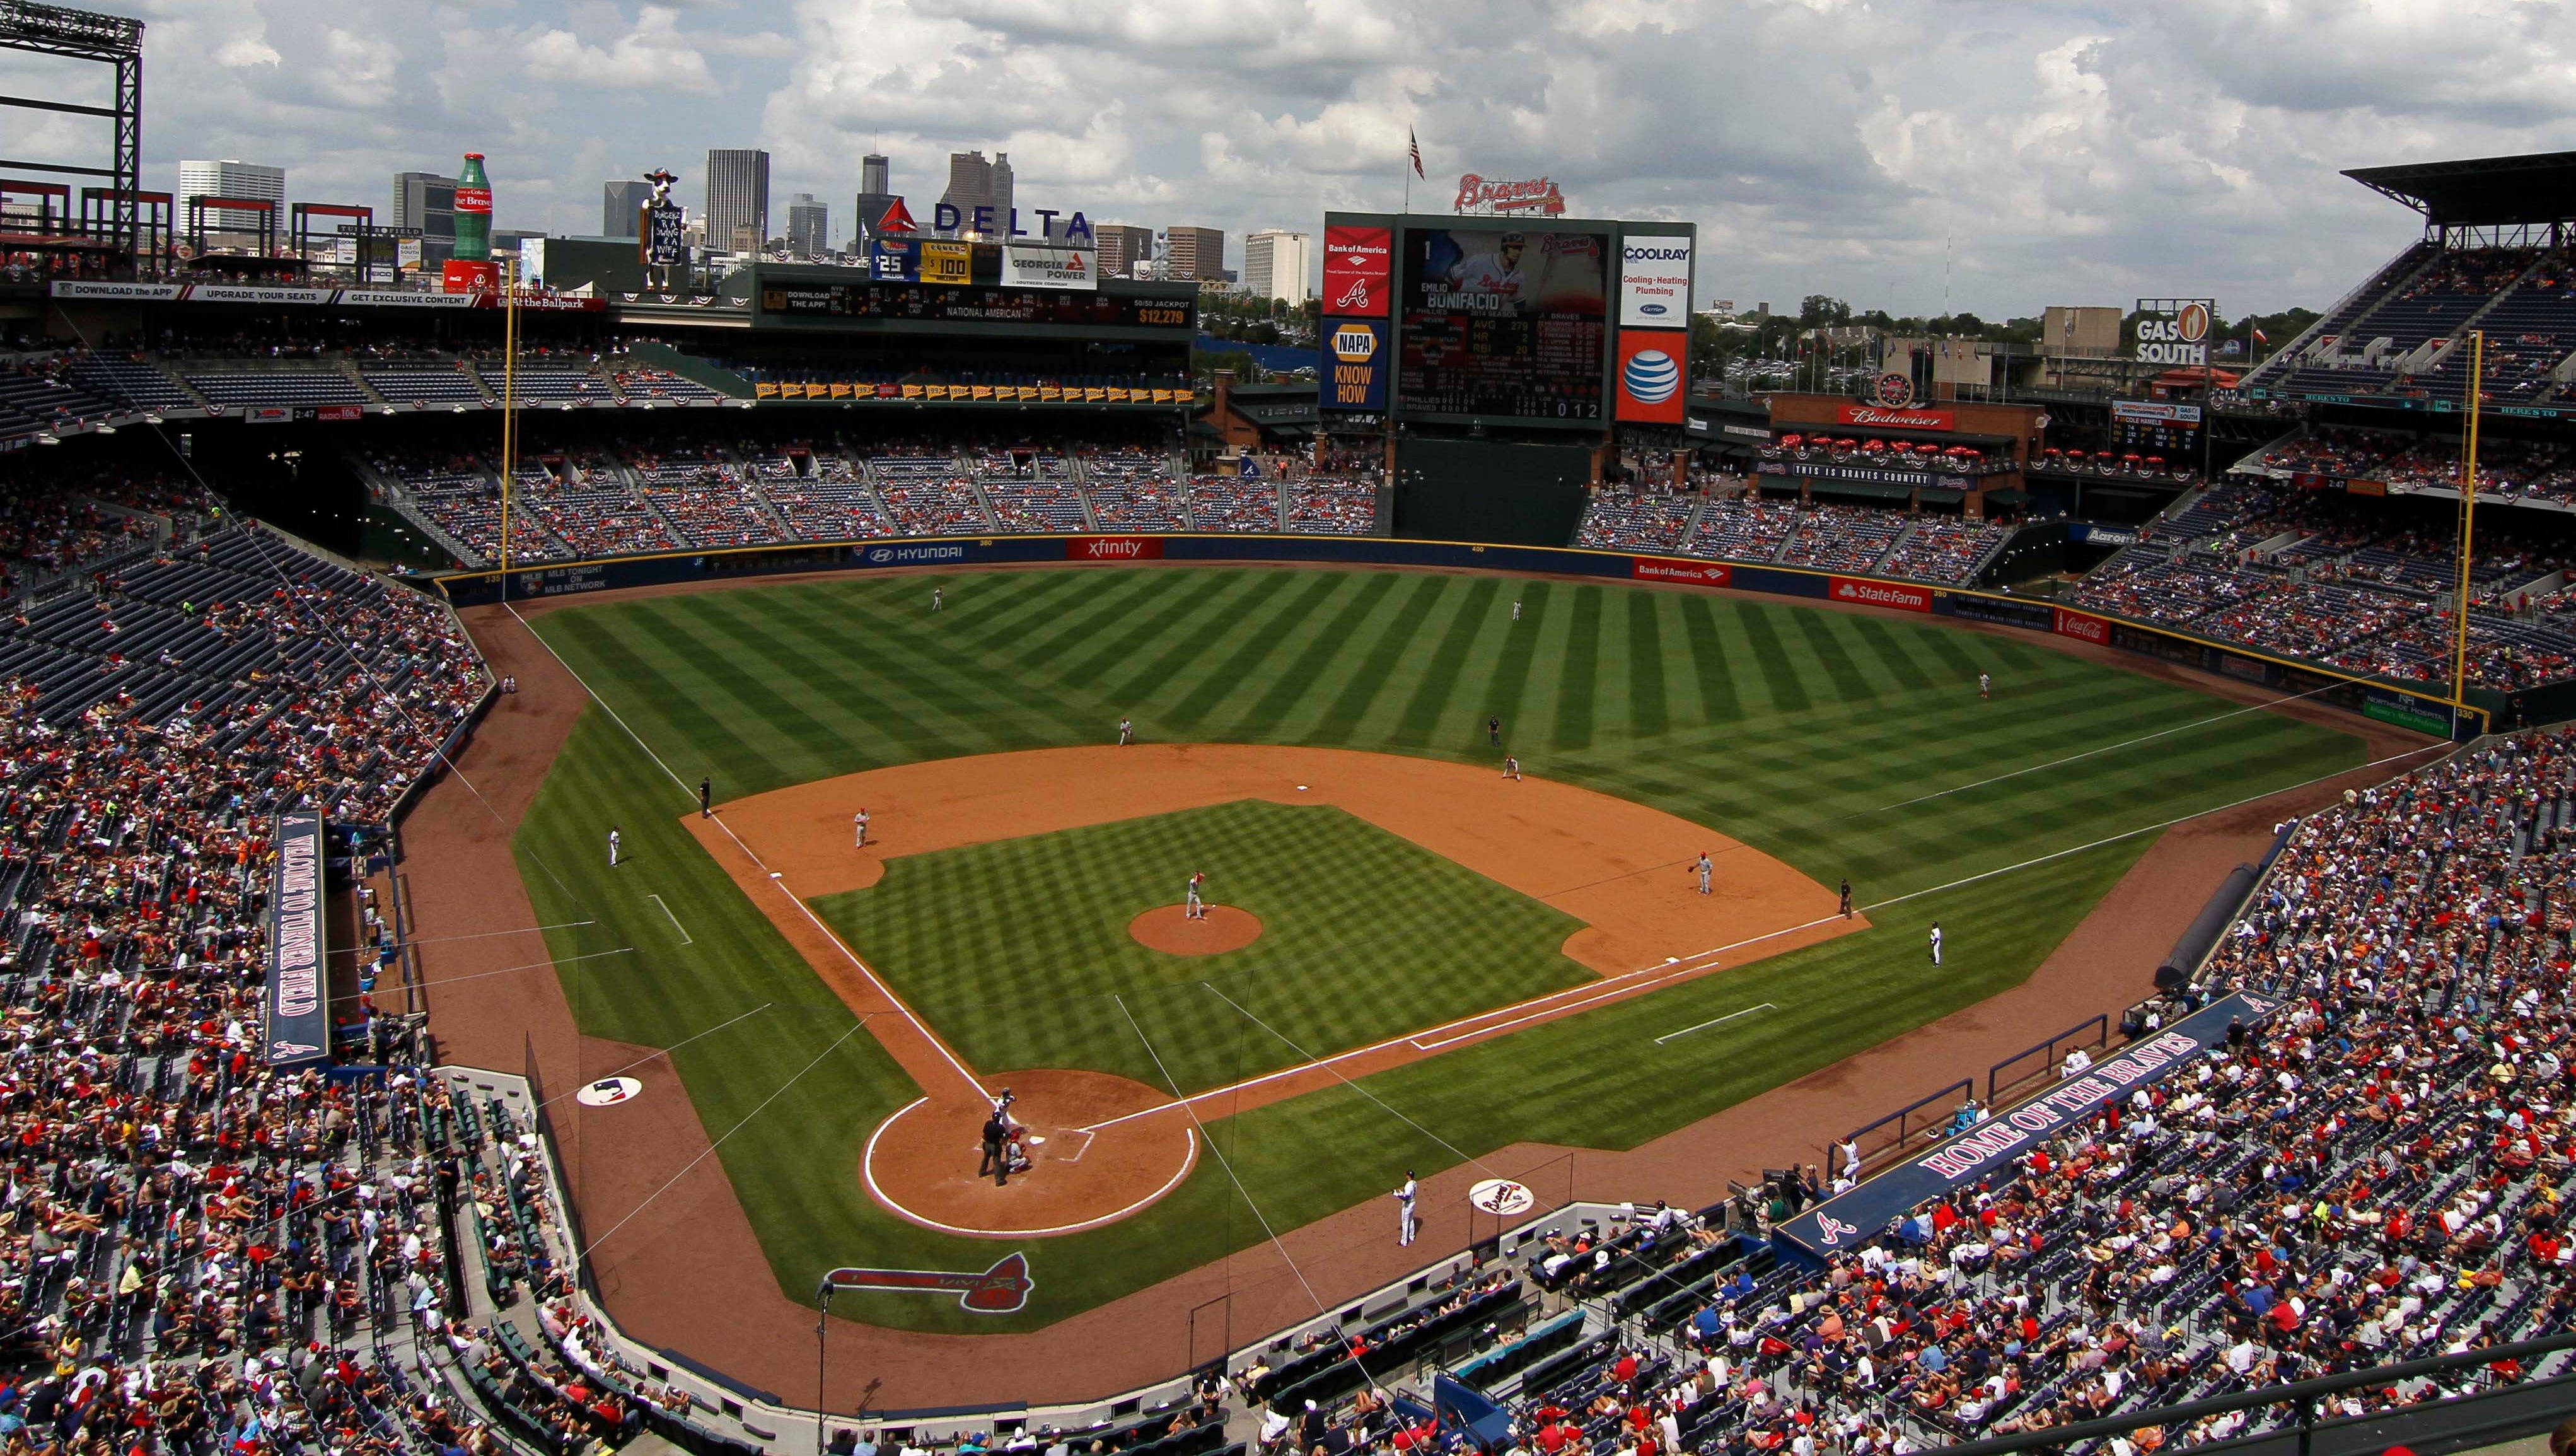 Family Of Man Killed In Turner Field Fall Sues Braves Mlb